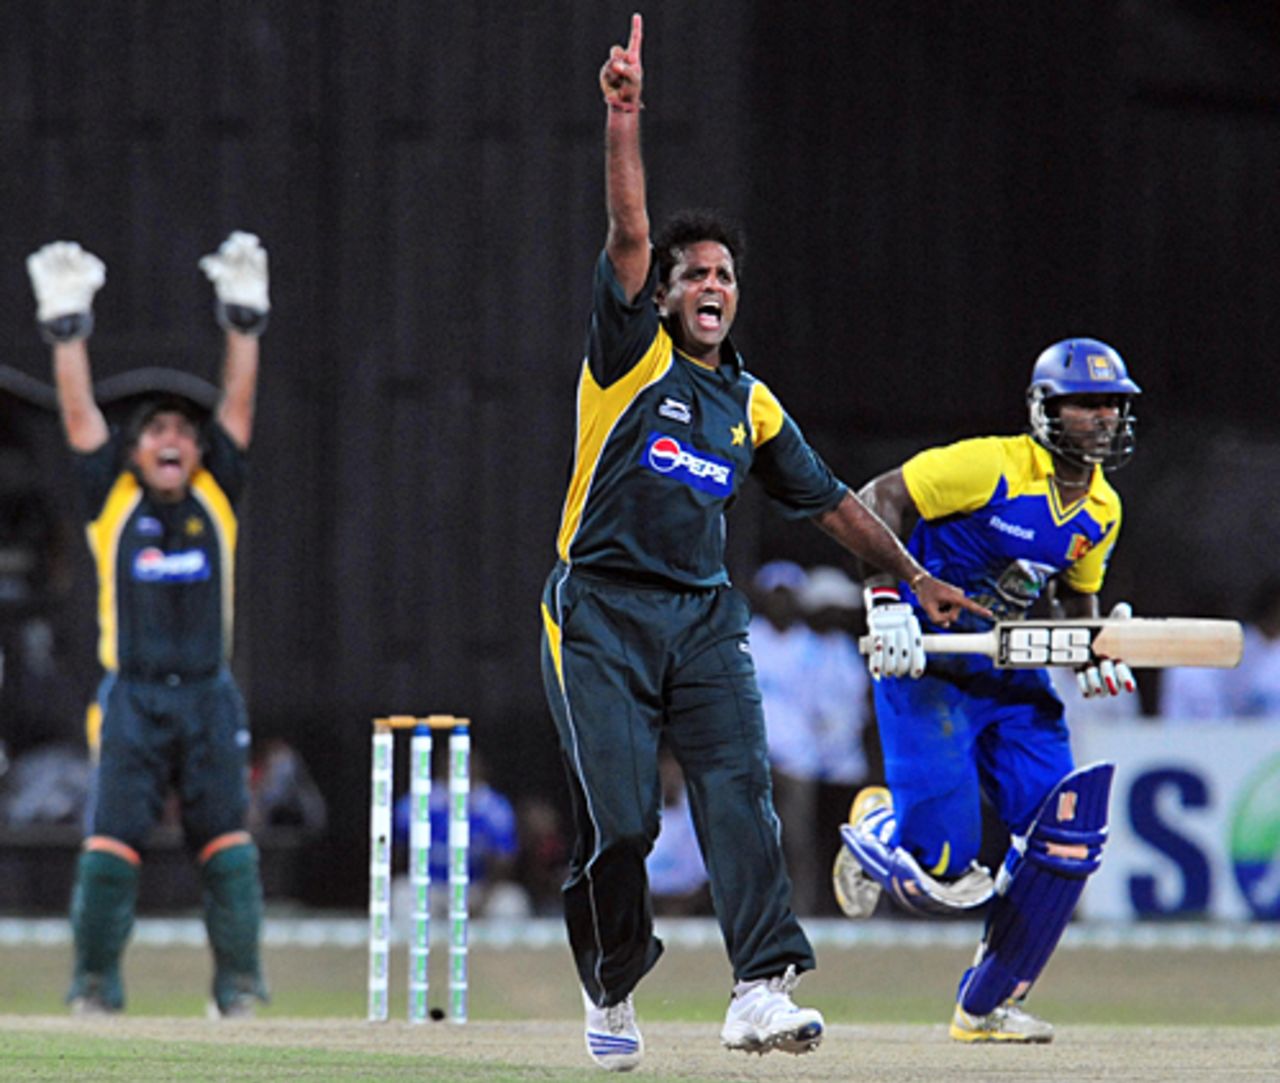 Naved-ul-Hasan successfully appeals for an lbw against Mahela Udawatte, Sri Lanka v Pakistan, only Twenty20 international, Colombo, August 12, 2009